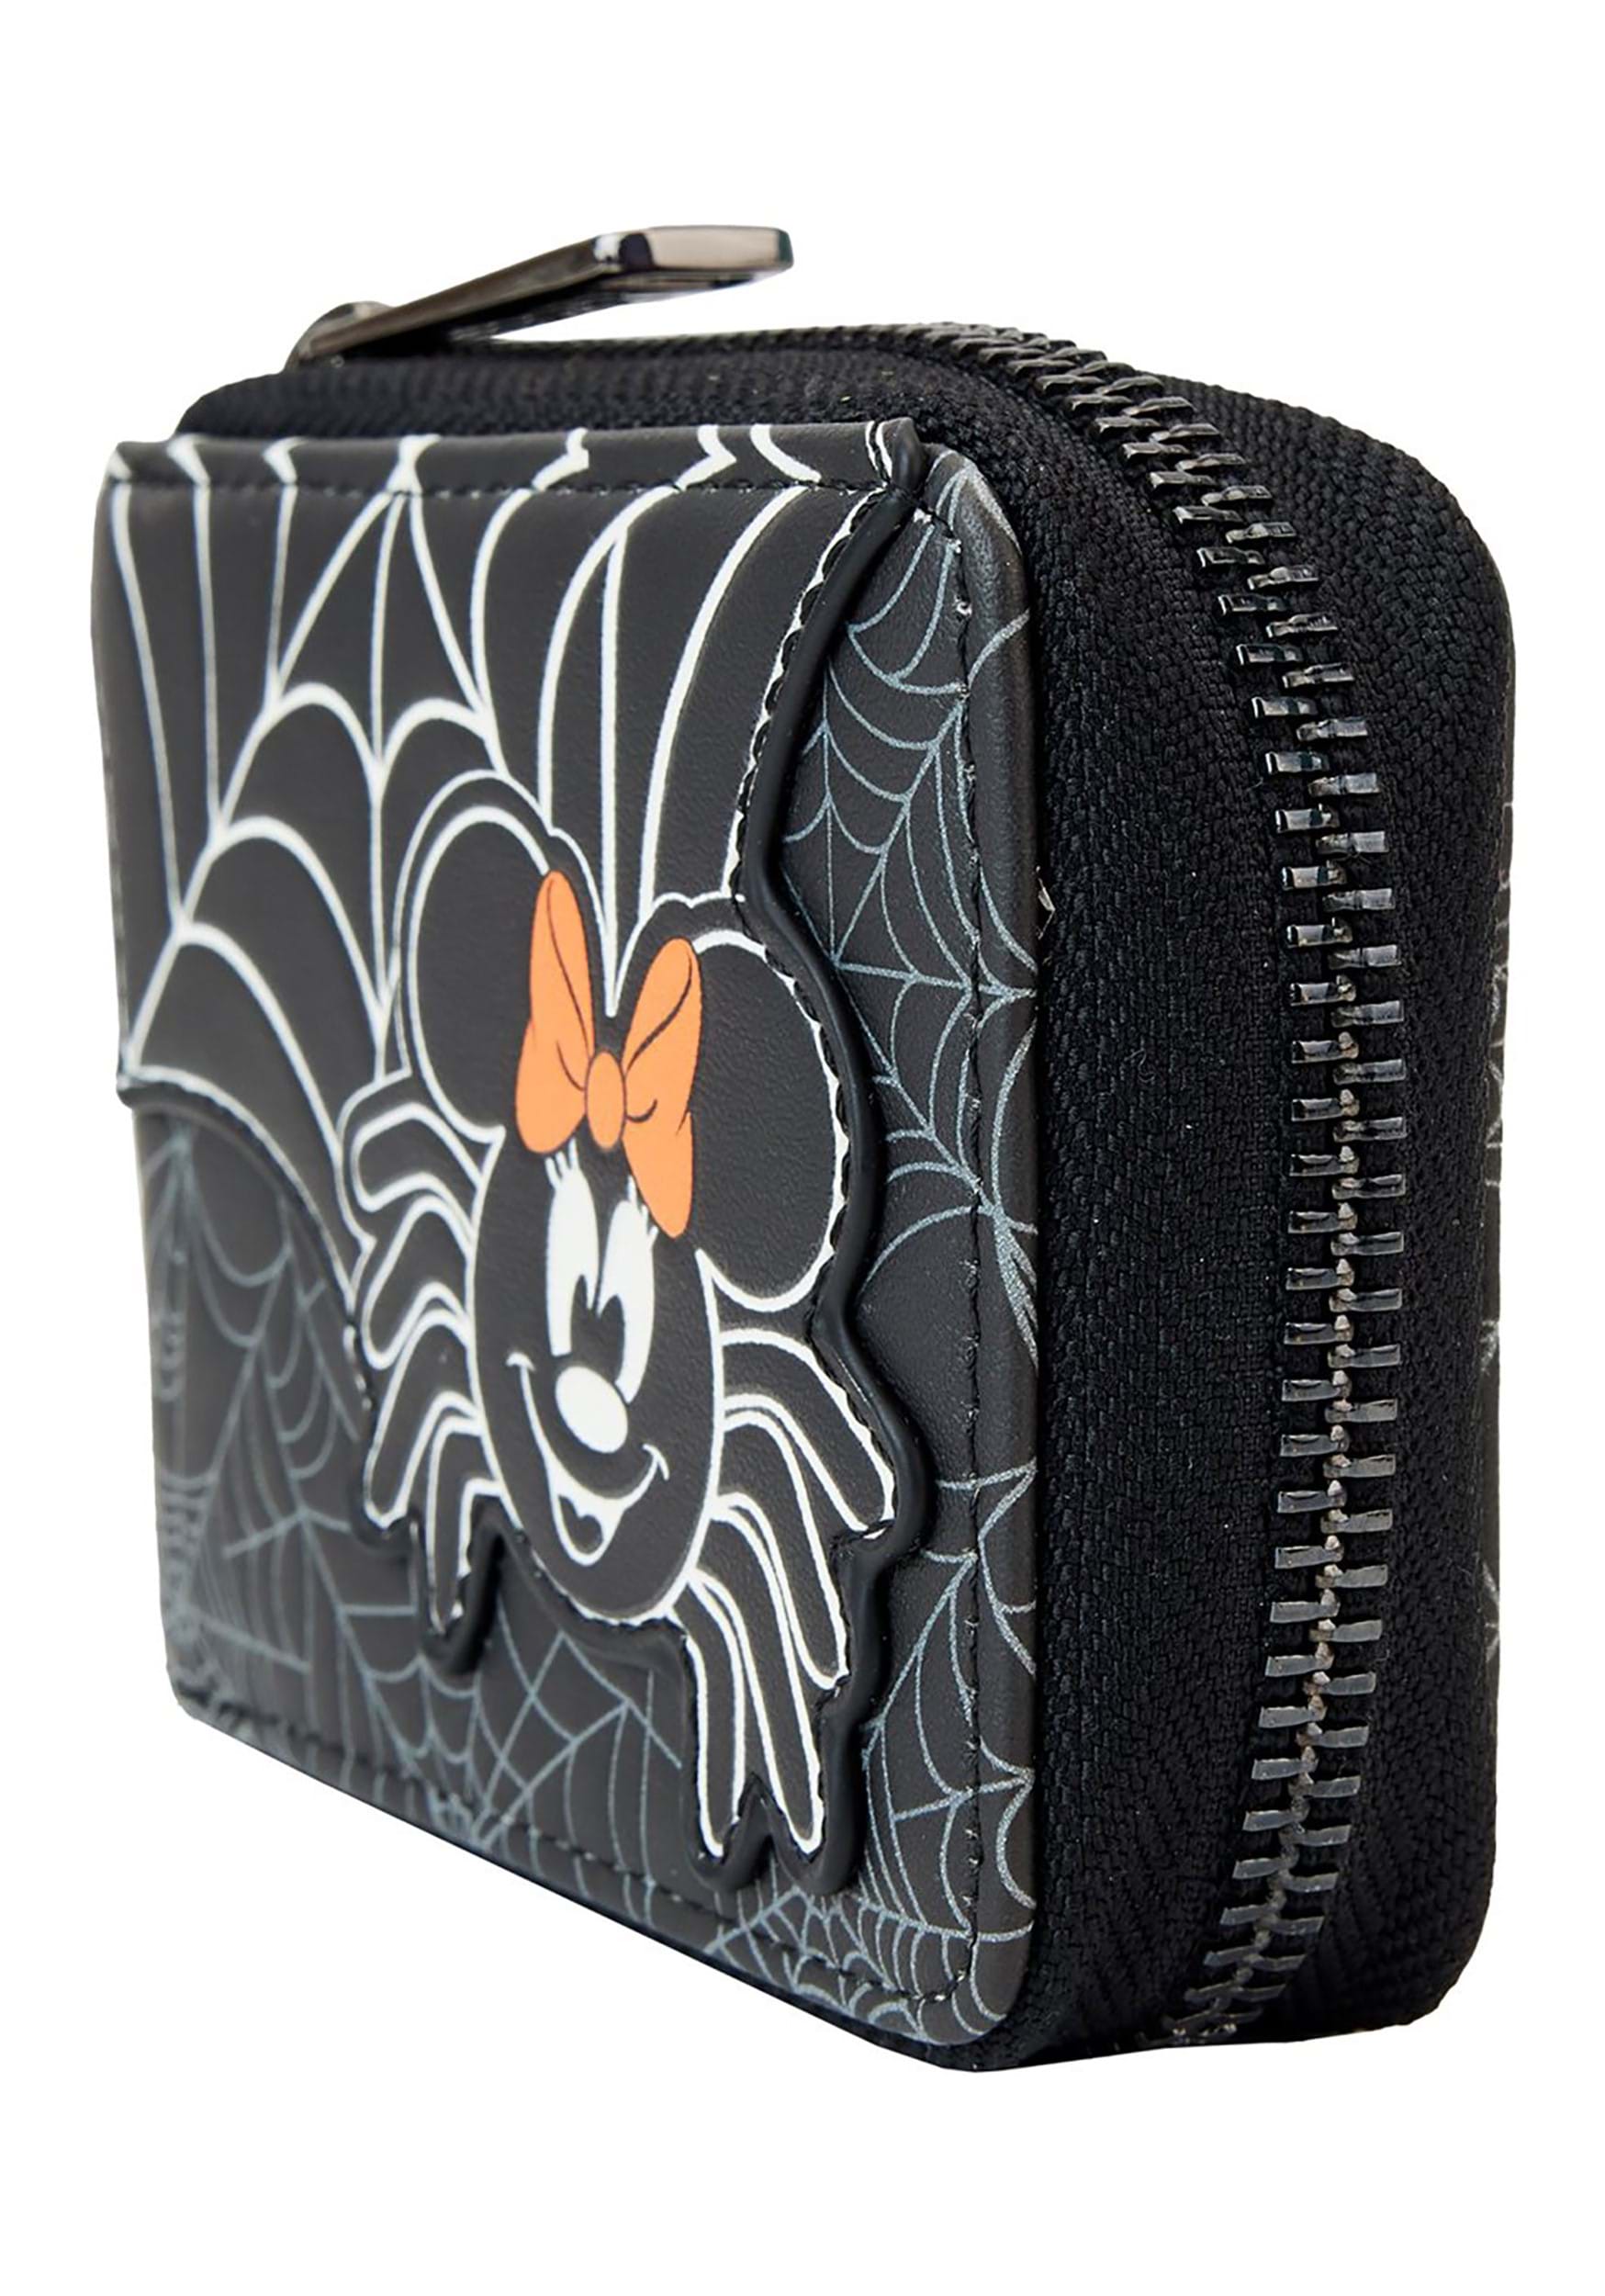 Loungefly Disney Minnie Mouse Spider Accordion Wallet